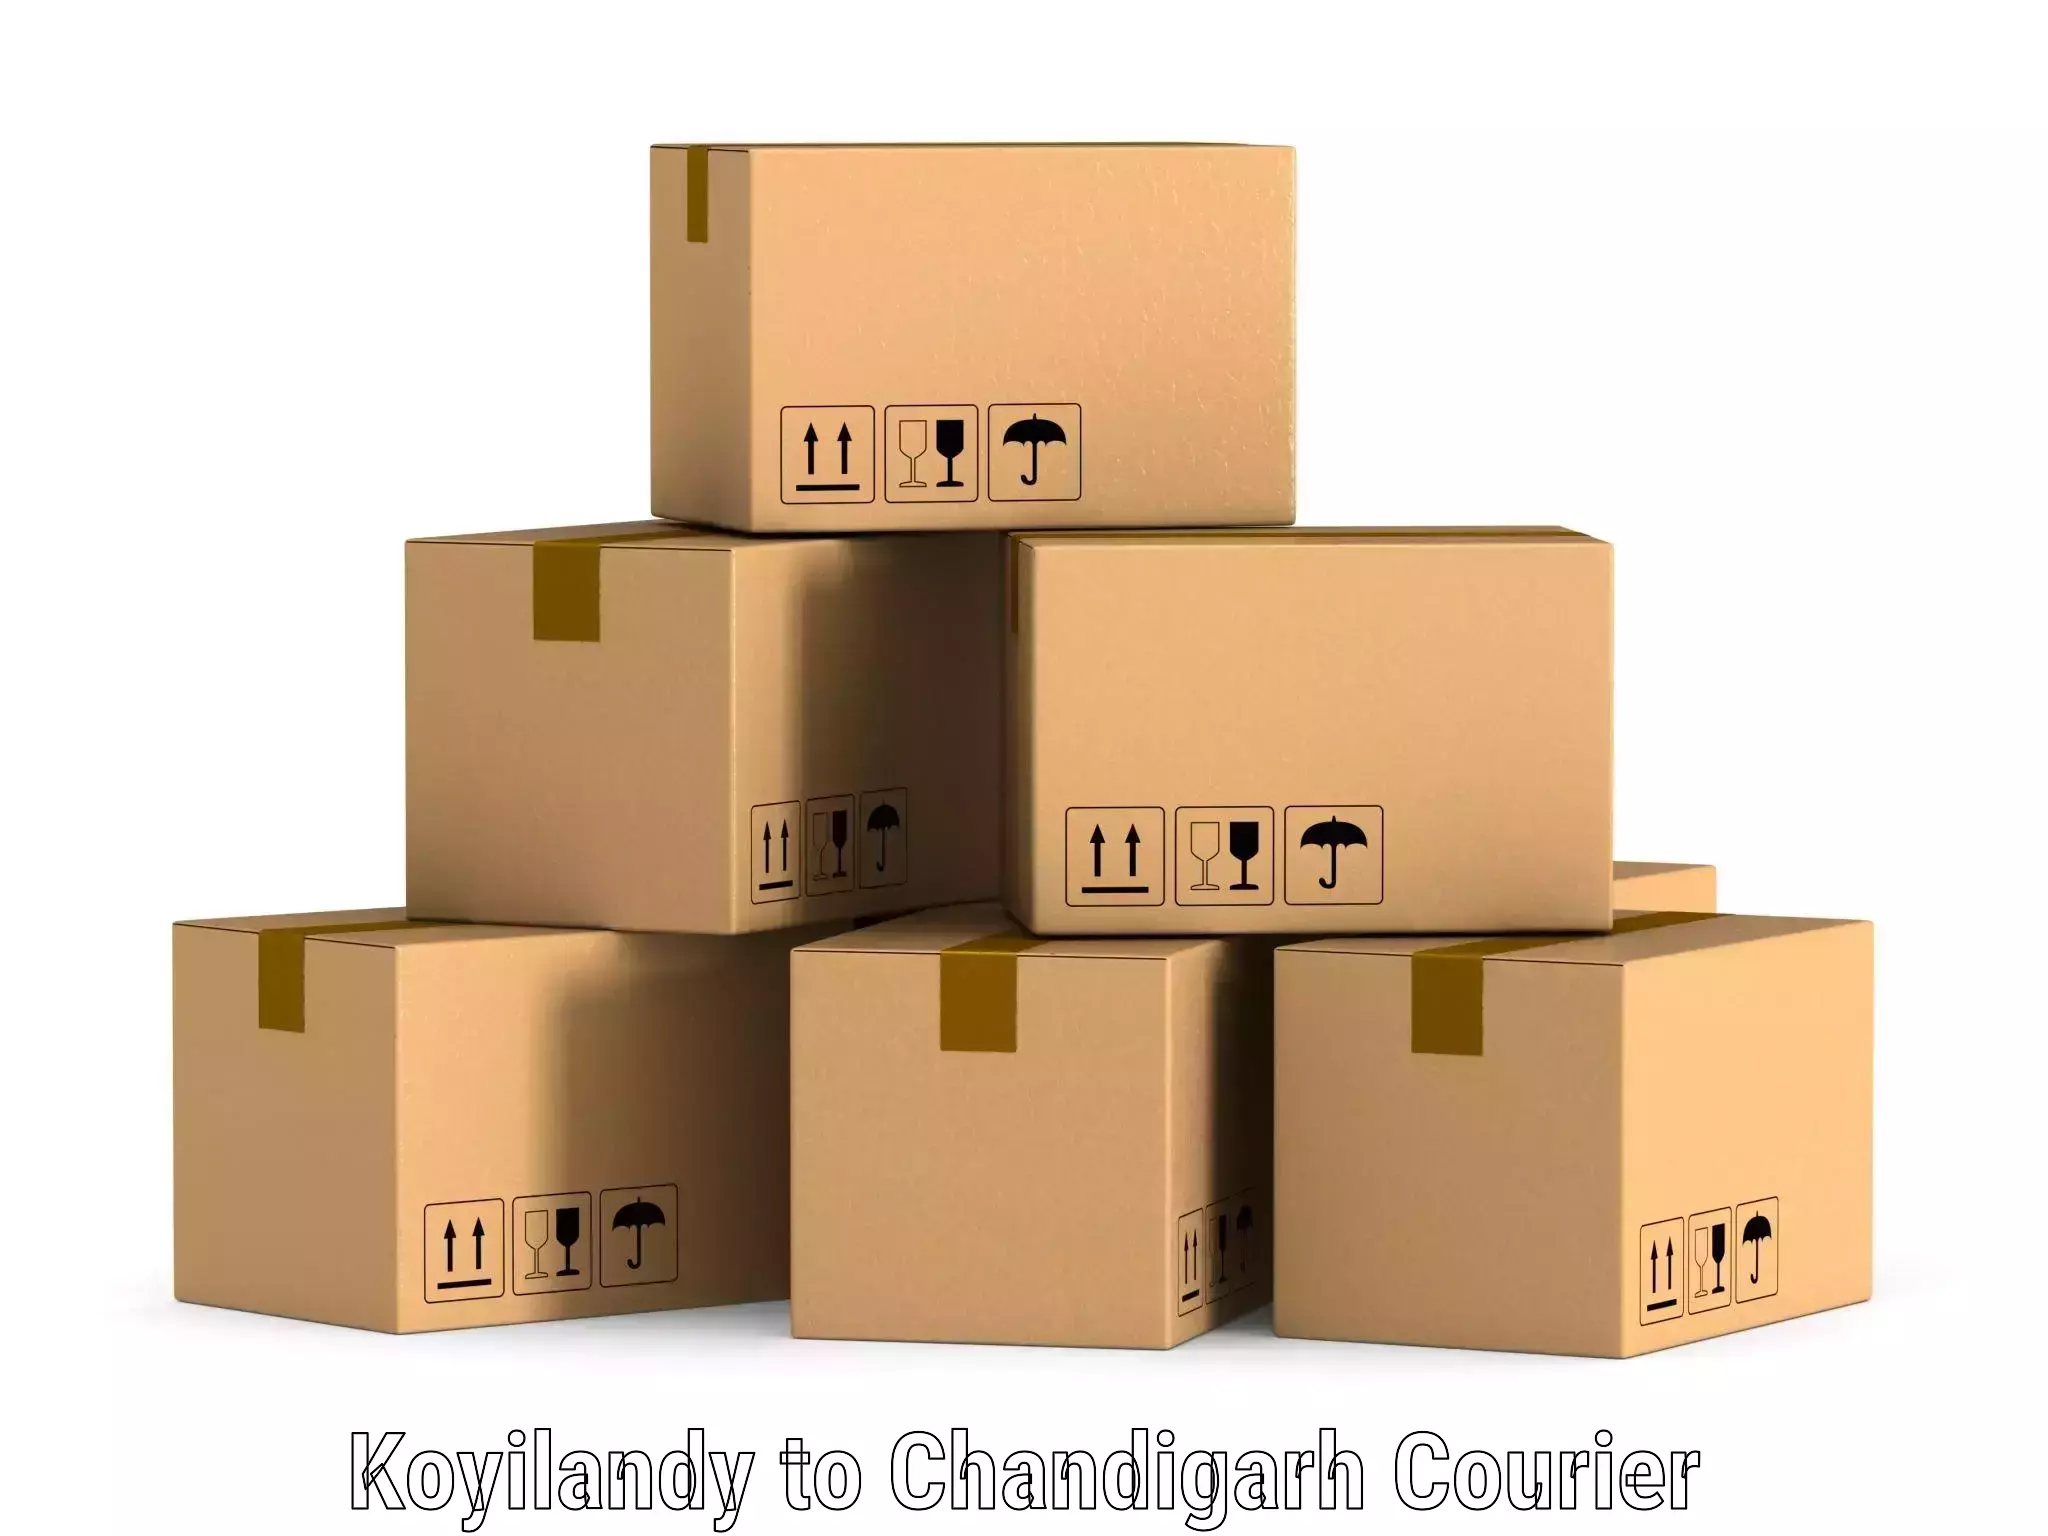 State-of-the-art courier technology Koyilandy to Chandigarh